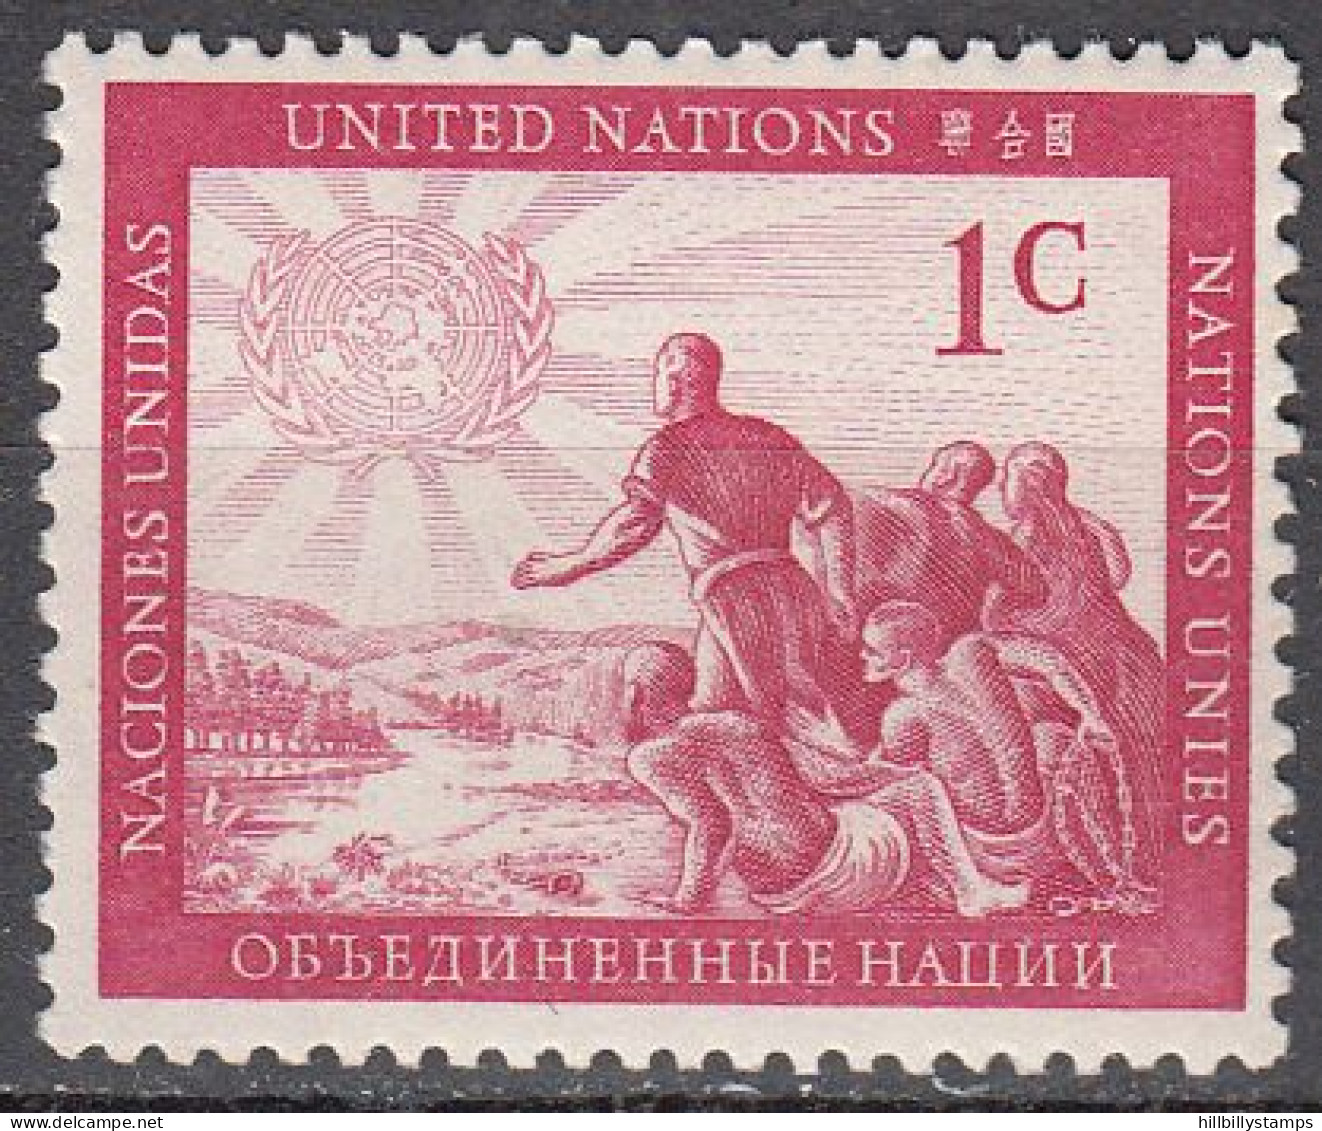 UNITED NATIONS NY   SCOTT NO 1  MNH     YEAR  1951 - Unused Stamps